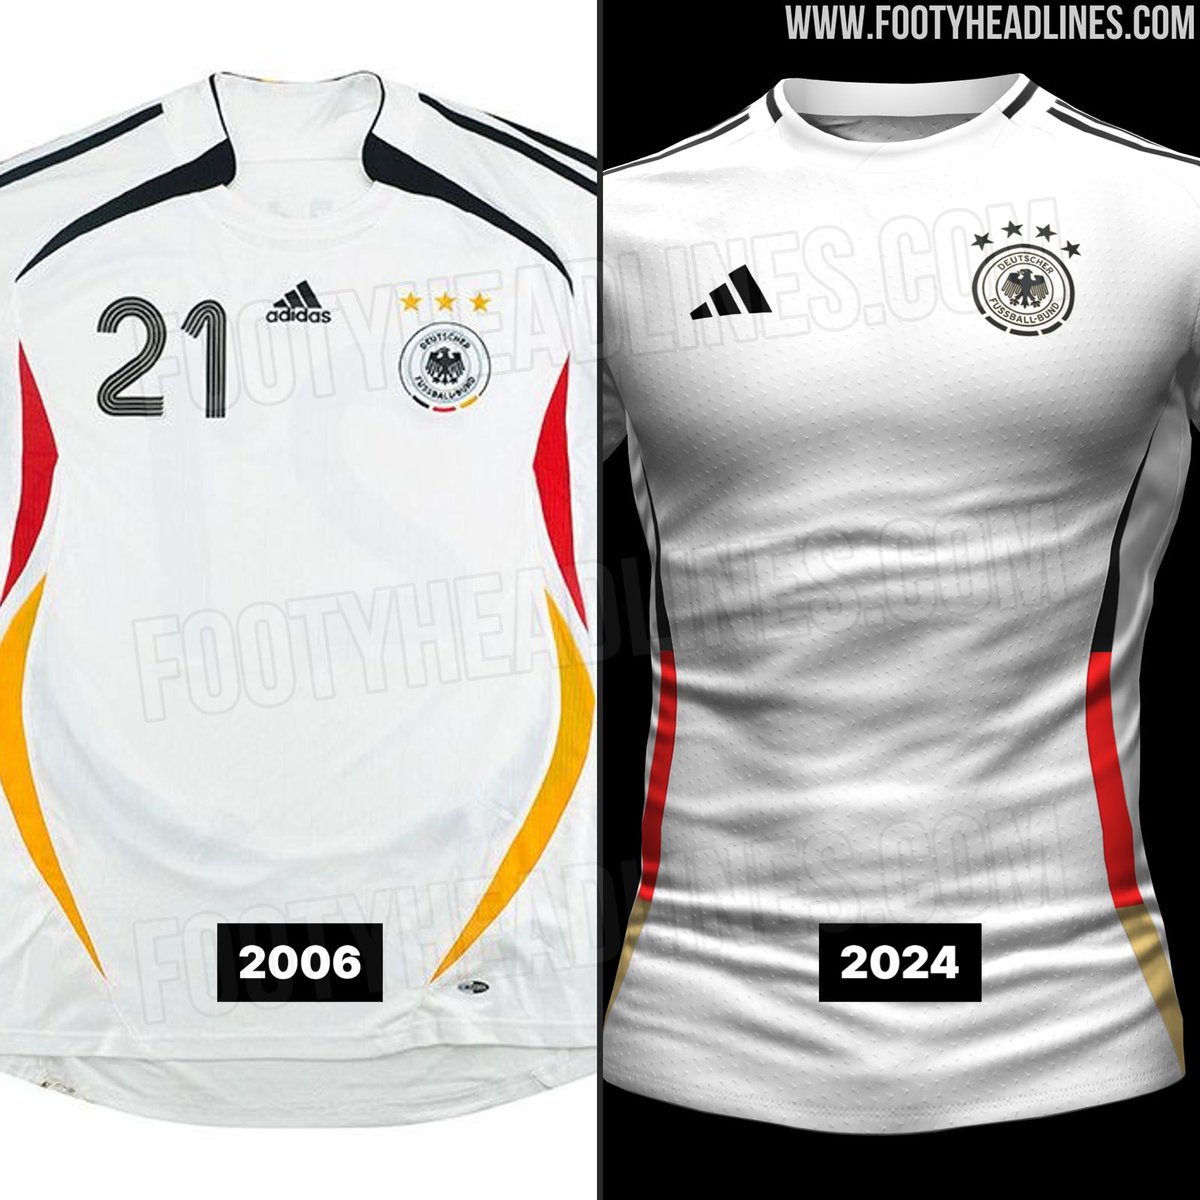 Bayern & Germany on Twitter "📸🇩🇪 Germany's 2024 home kit will mainly